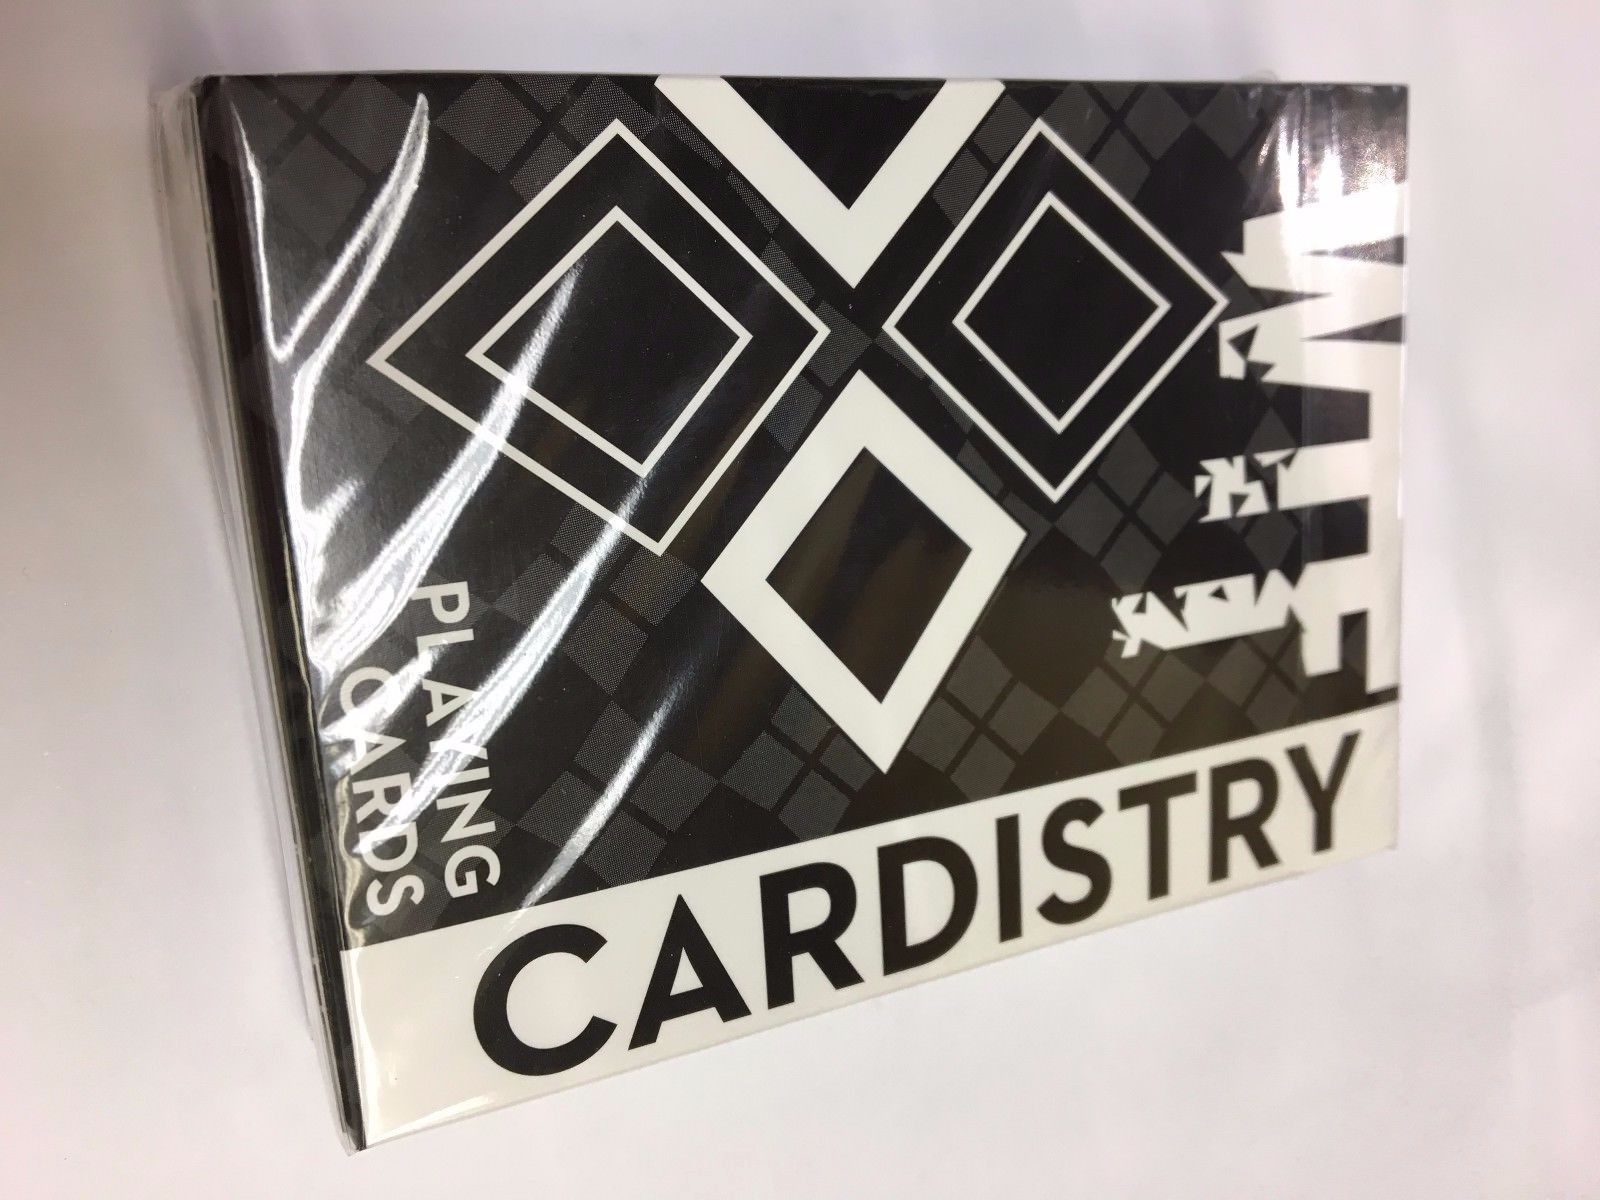 Home > Rare & Specialty Cards > Wtf Cardistry Spelling - Sign , HD Wallpaper & Backgrounds